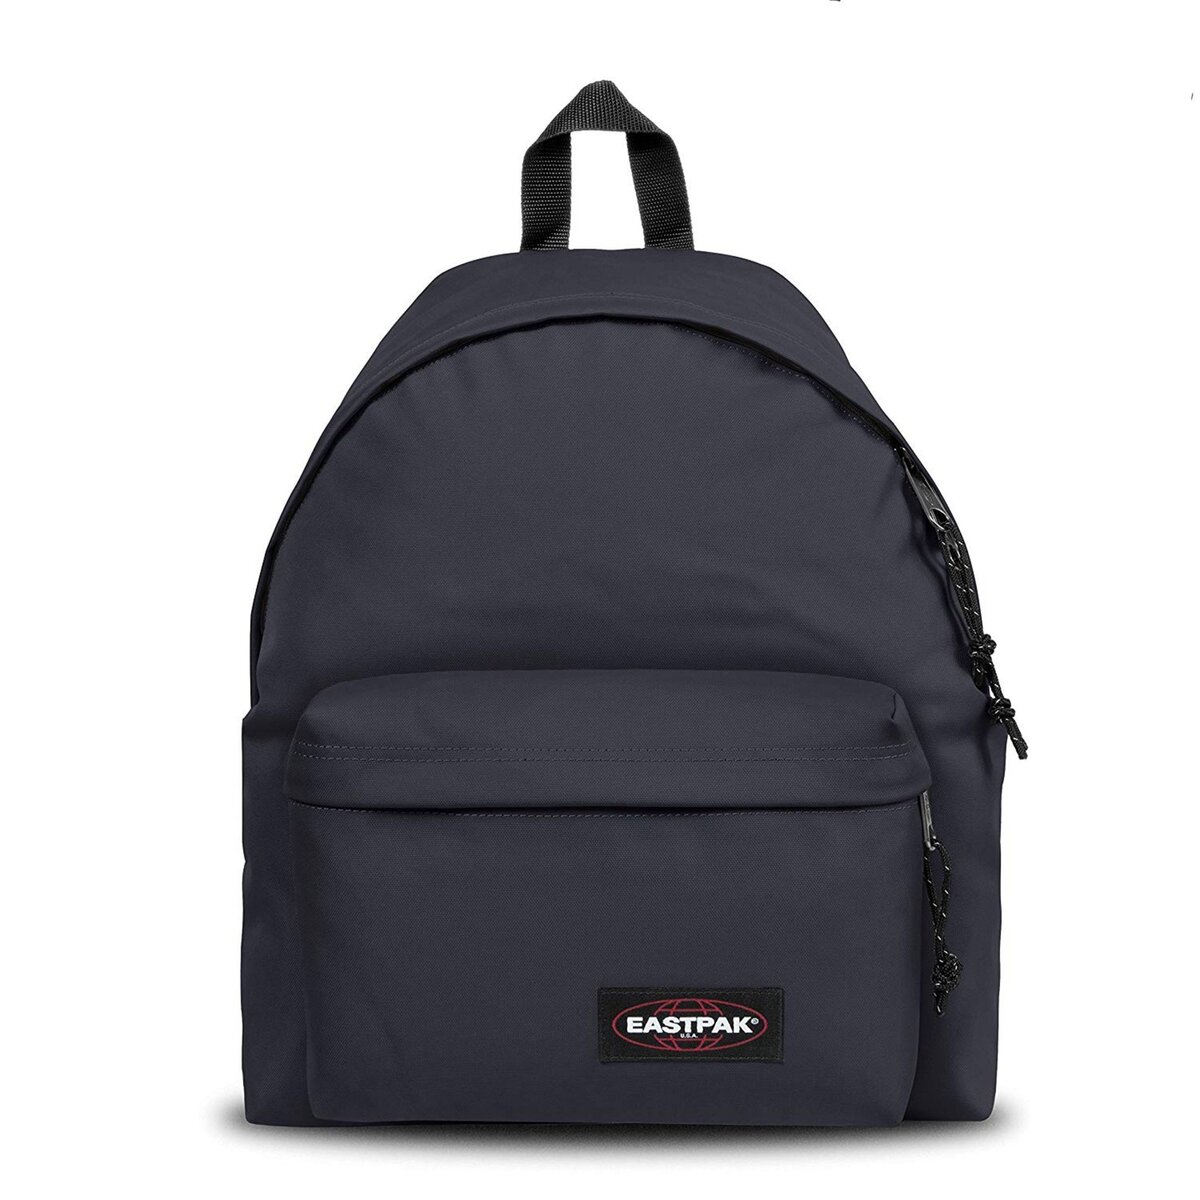 EASTPAK Sac à dos PADDED PAK'R night navy 1 compartiment